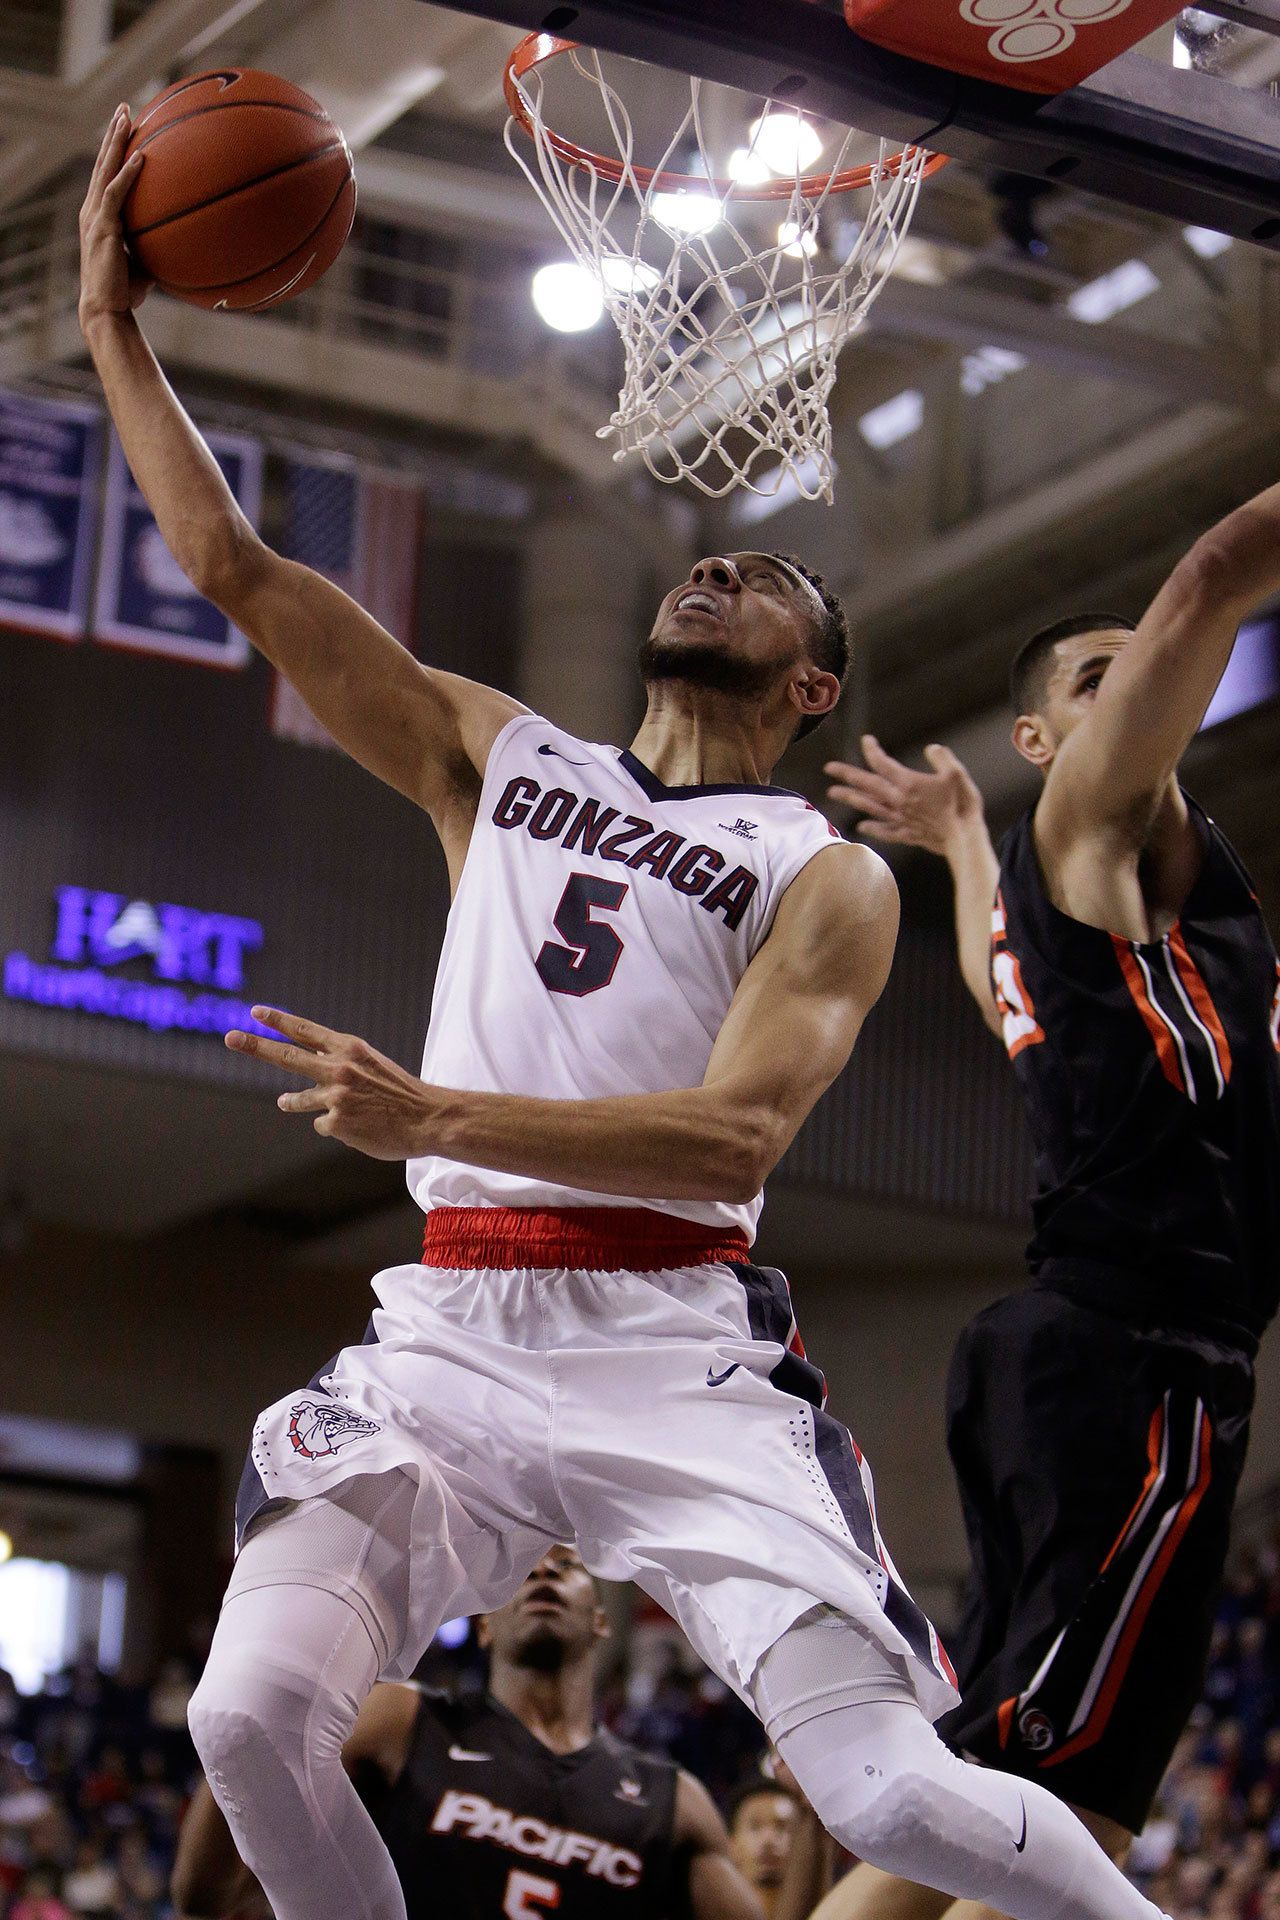 Gonzaga guard Nigel Williams-Goss (5) goes up for a layup against Pacific center Sami Eleraky during the first half of a game Feb. 18, 2017, in Spokane. (AP Photo/Young Kwak)